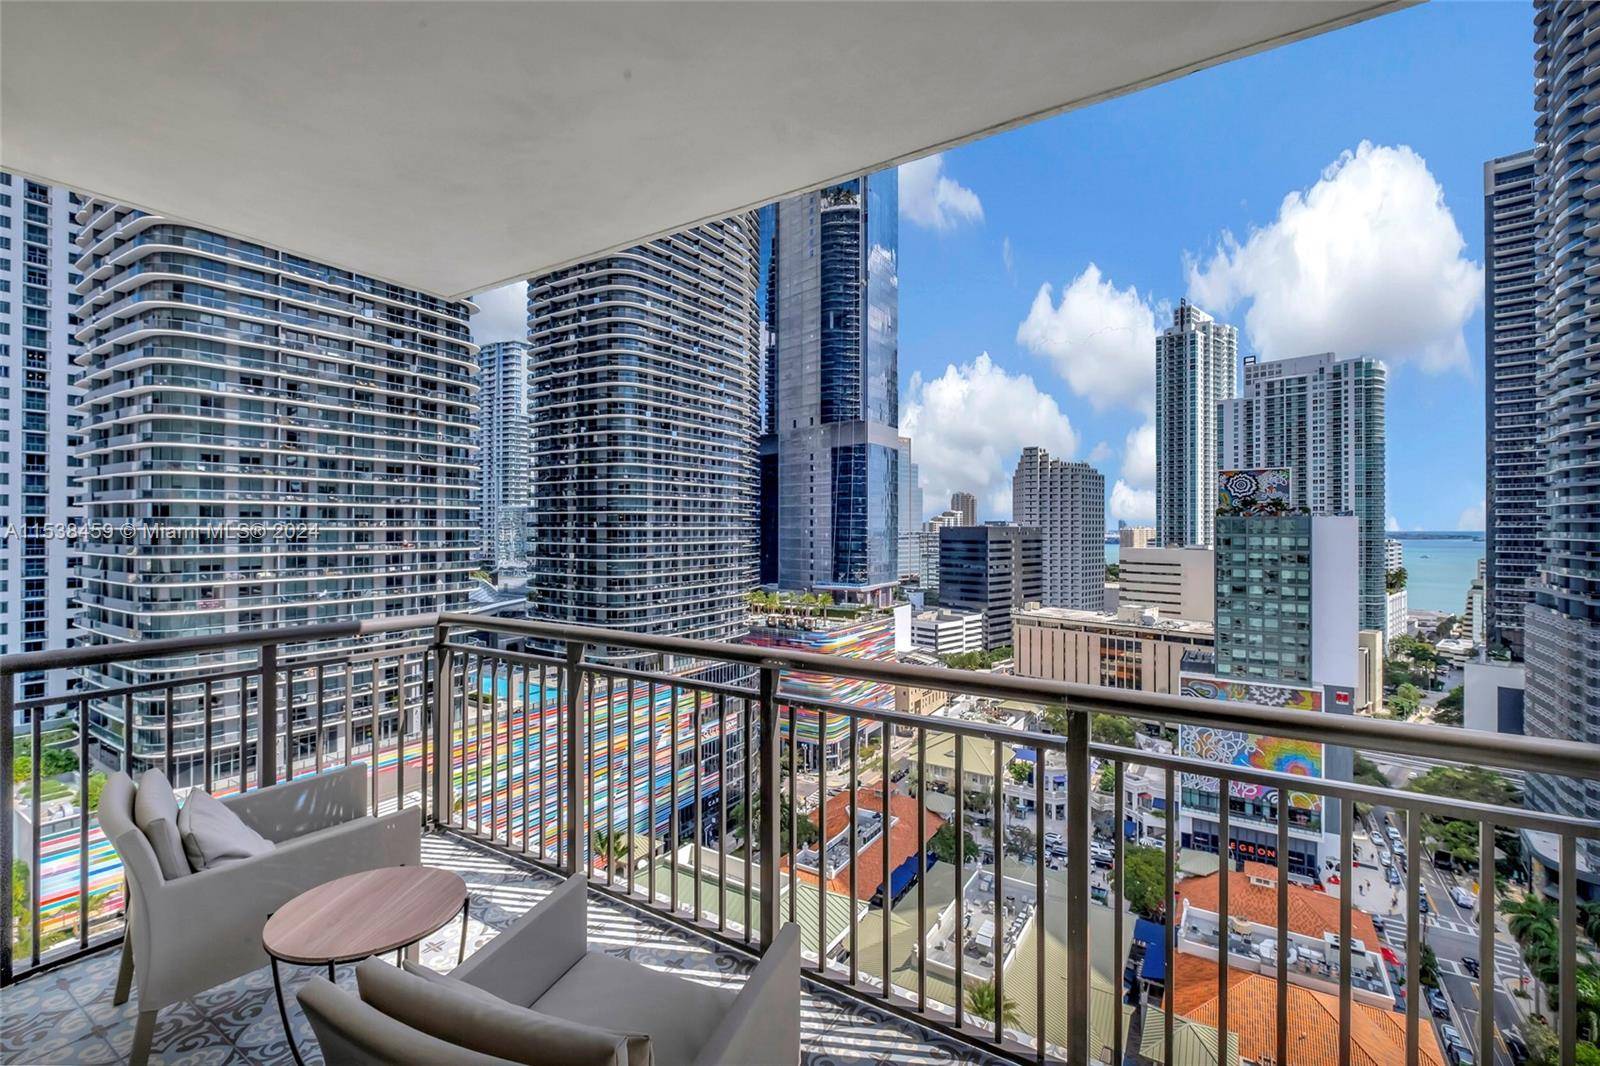 Step into luxury living in this fully furnished, turn key ready unit nestled in the heart of Brickell Miami's Mary Brickell Village.